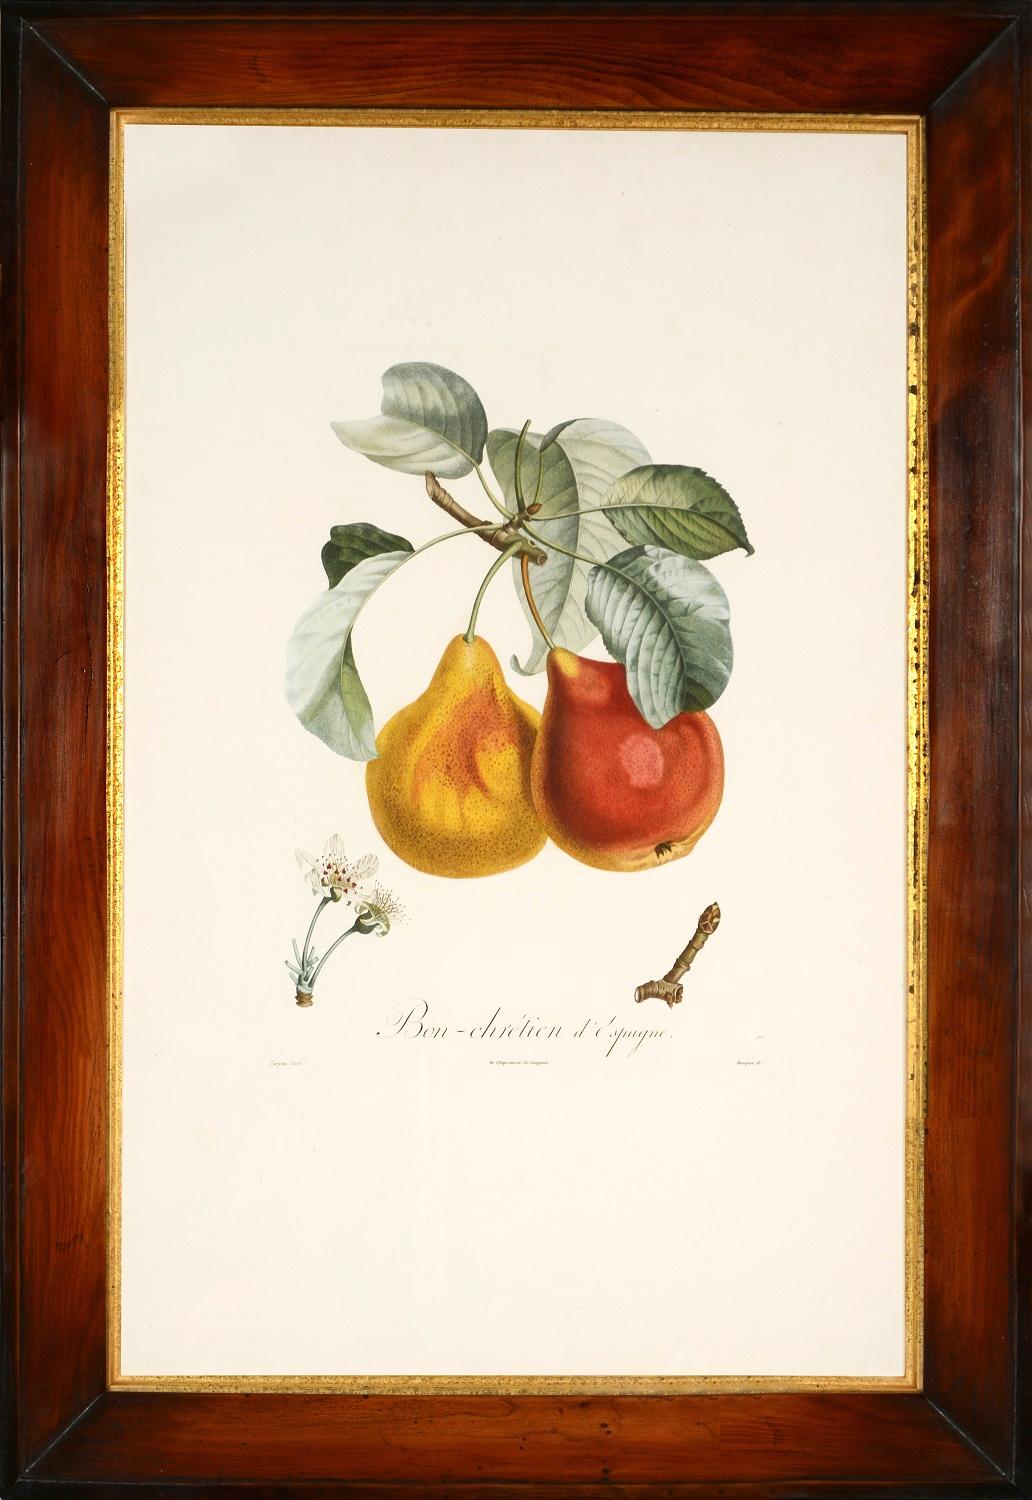  A Group of Six Pears. - Print by TURPIN, P[ierre Jean Francois]